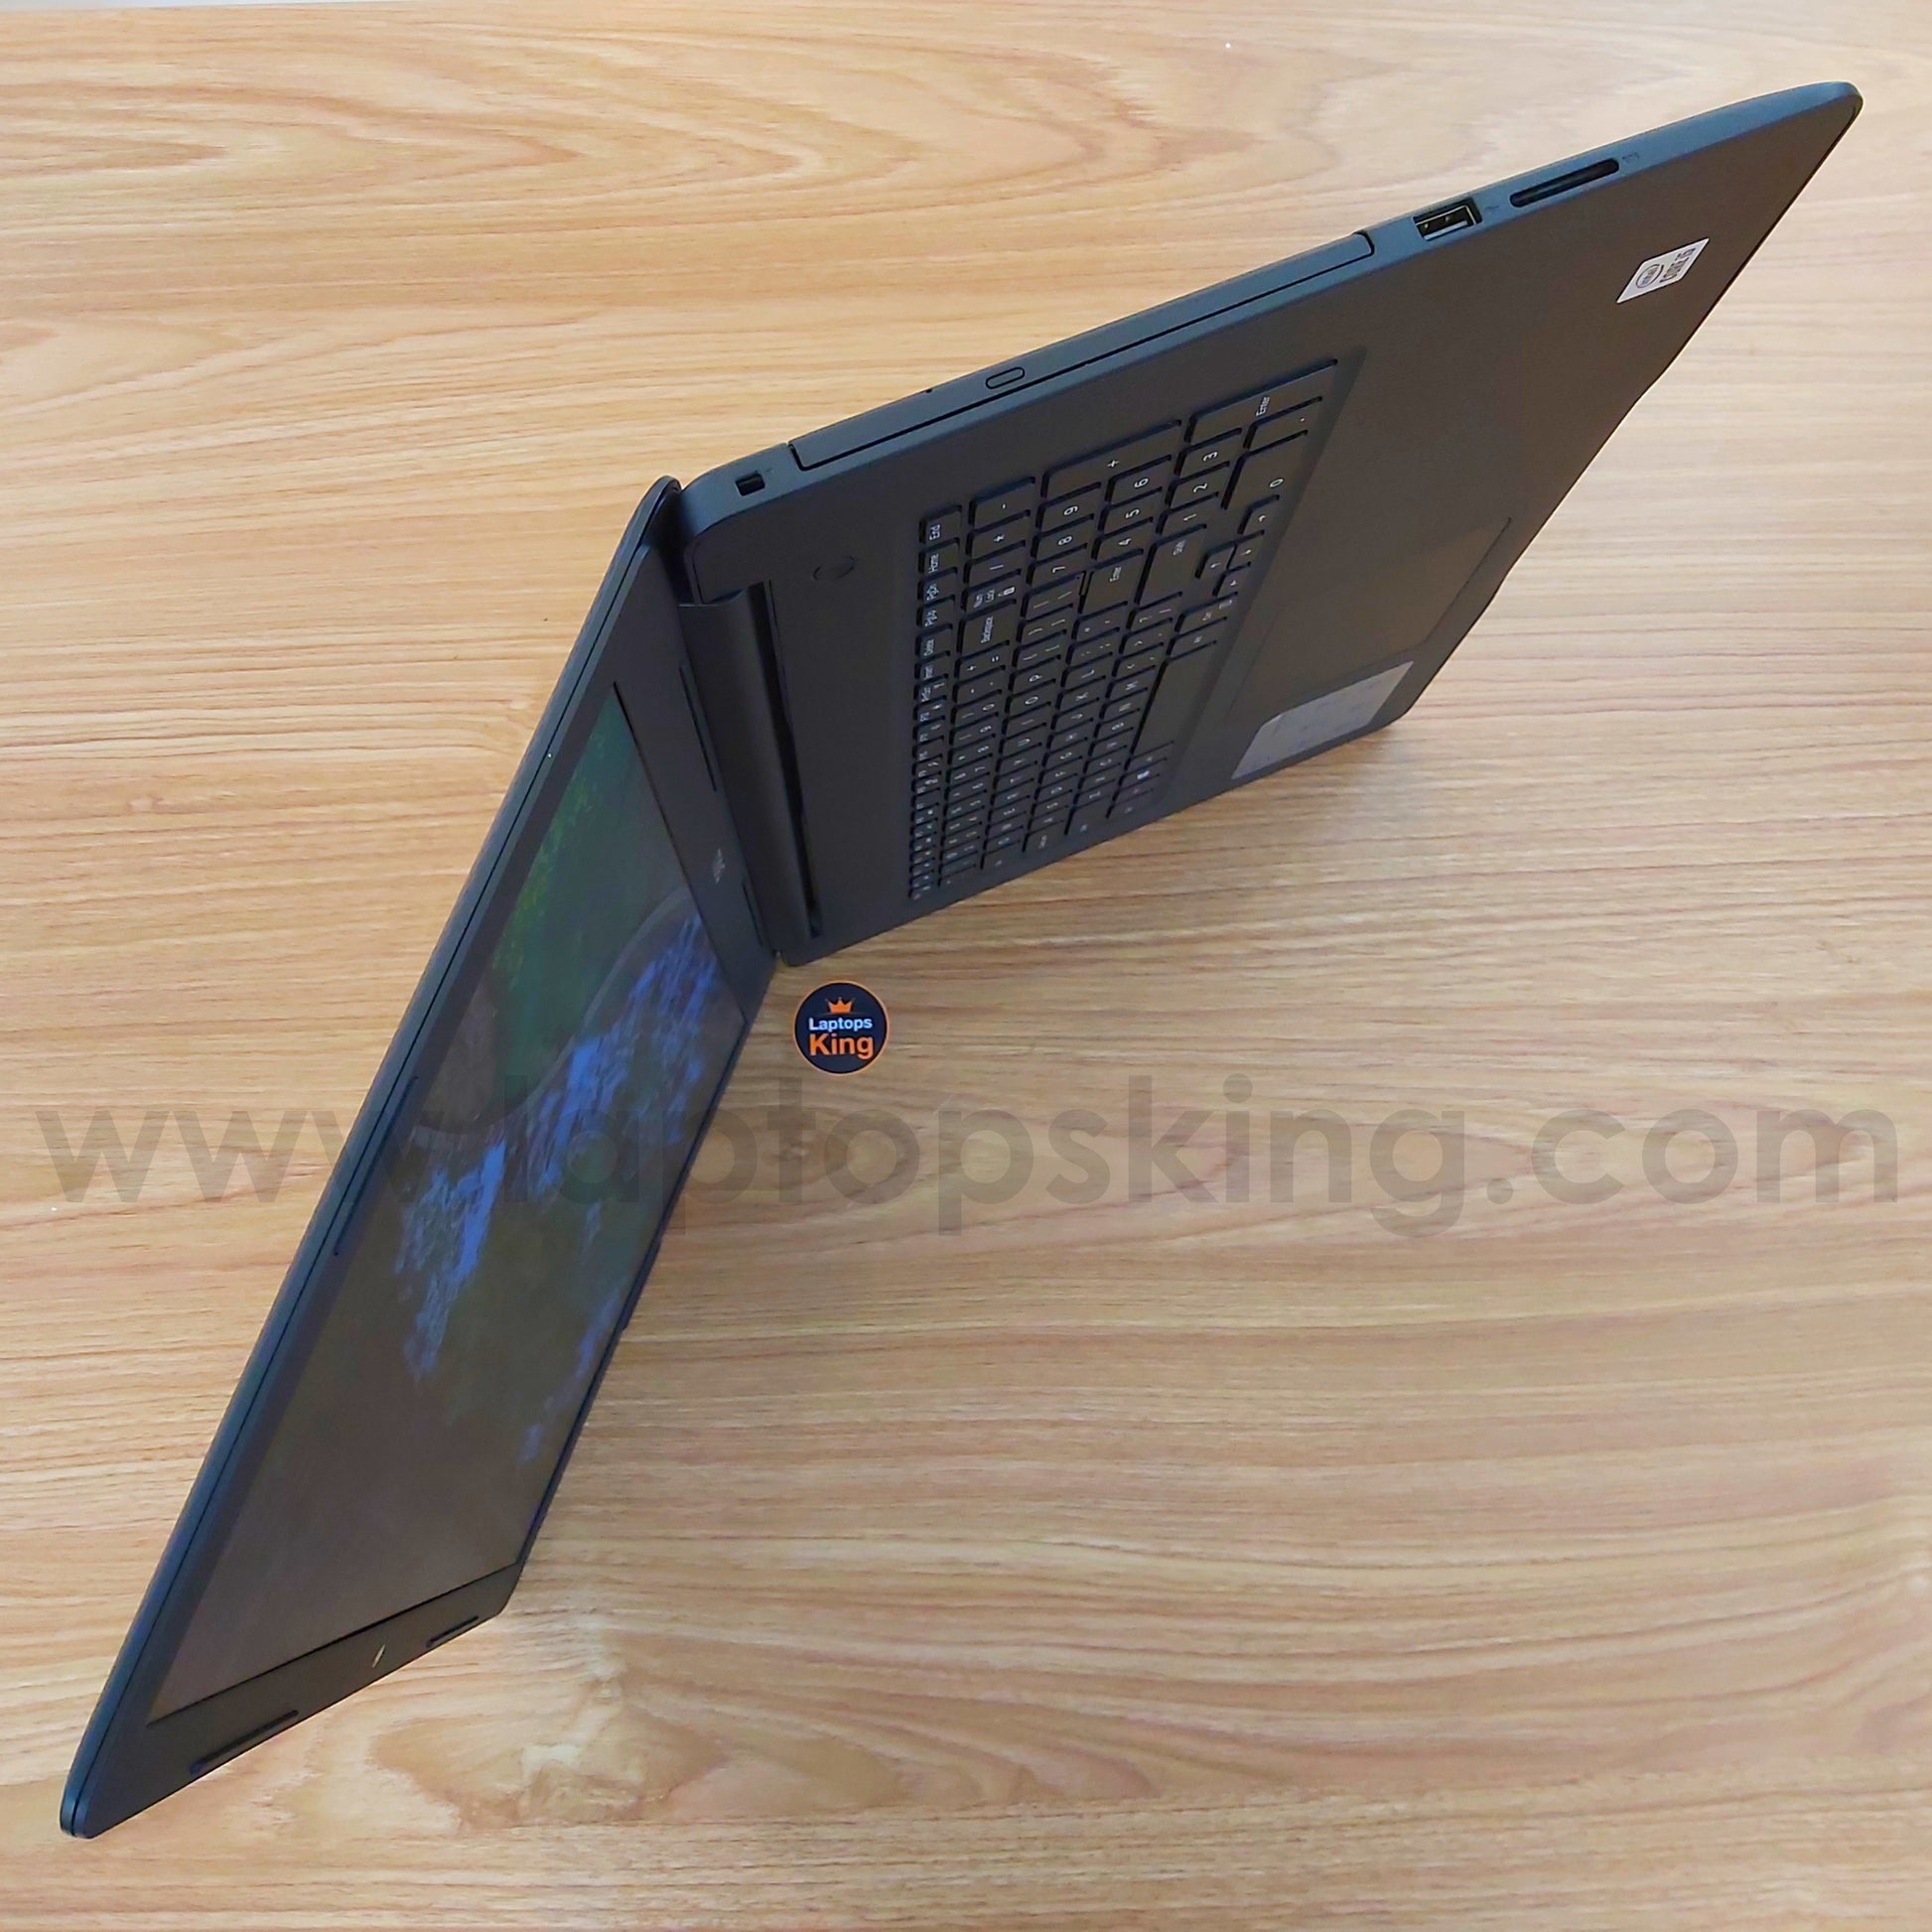 Dell Inspiron 3793 i5-1035G1 17.3" Laptop (Open Box) Gaming laptop, Graphic Design laptop, best laptop for gaming, best laptop for graphic design, computer for sale Lebanon, laptop for video editing in Lebanon, laptop for sale Lebanon, best graphic design laptop,	best video editing laptop, best programming laptop, laptop for sale in Lebanon, laptops for sale in Lebanon, laptop for sale in Lebanon, buy computer Lebanon, buy laptop Lebanon.